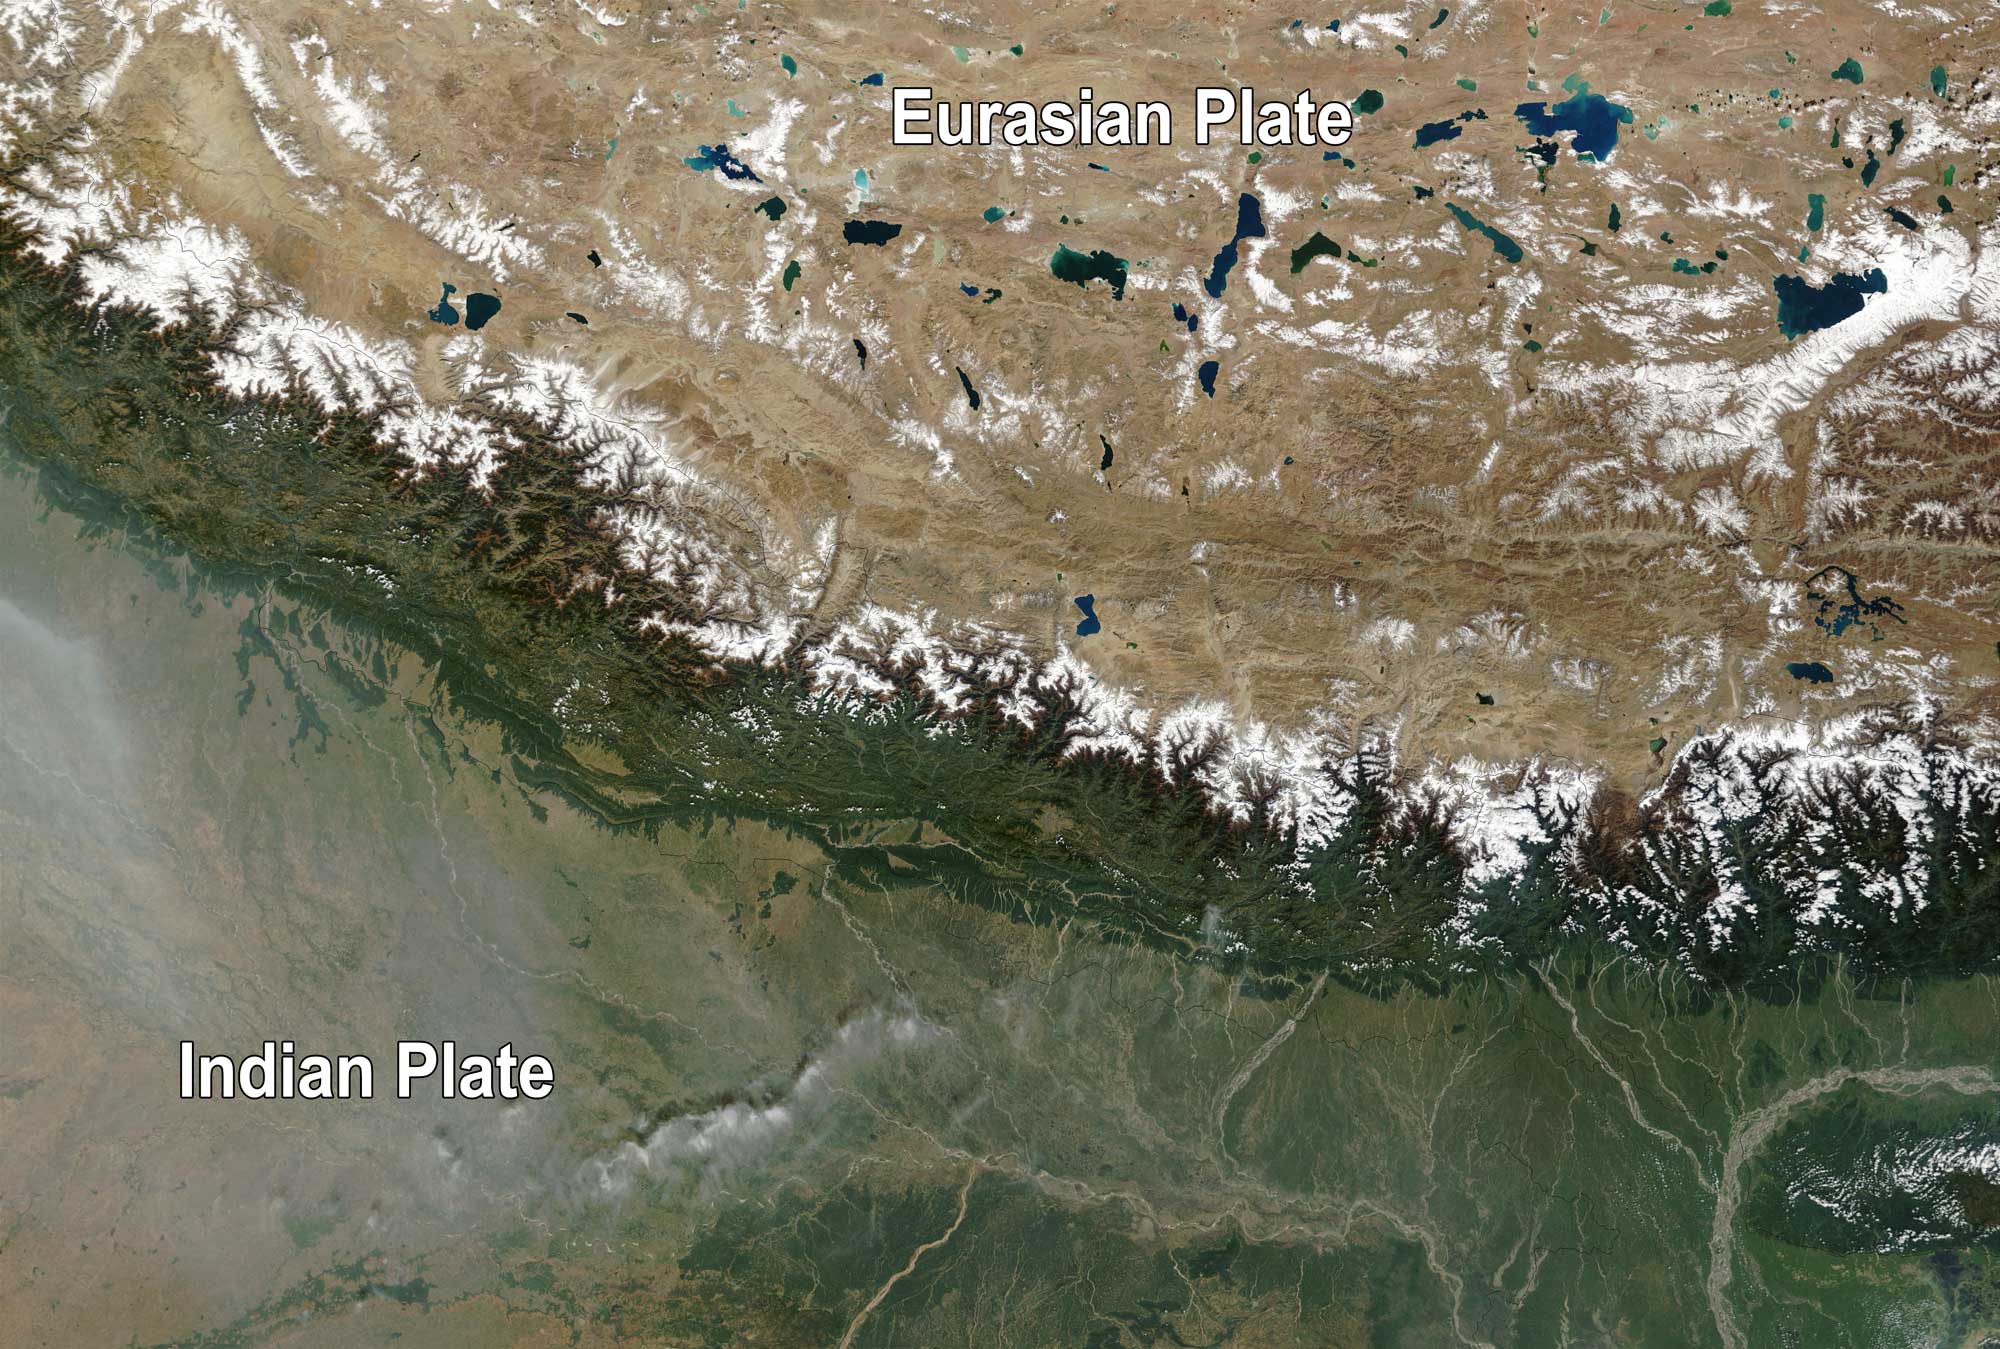 Satellite image showing the Himalayan mountains with the Eurasian Plate and Indian Plate labelled.